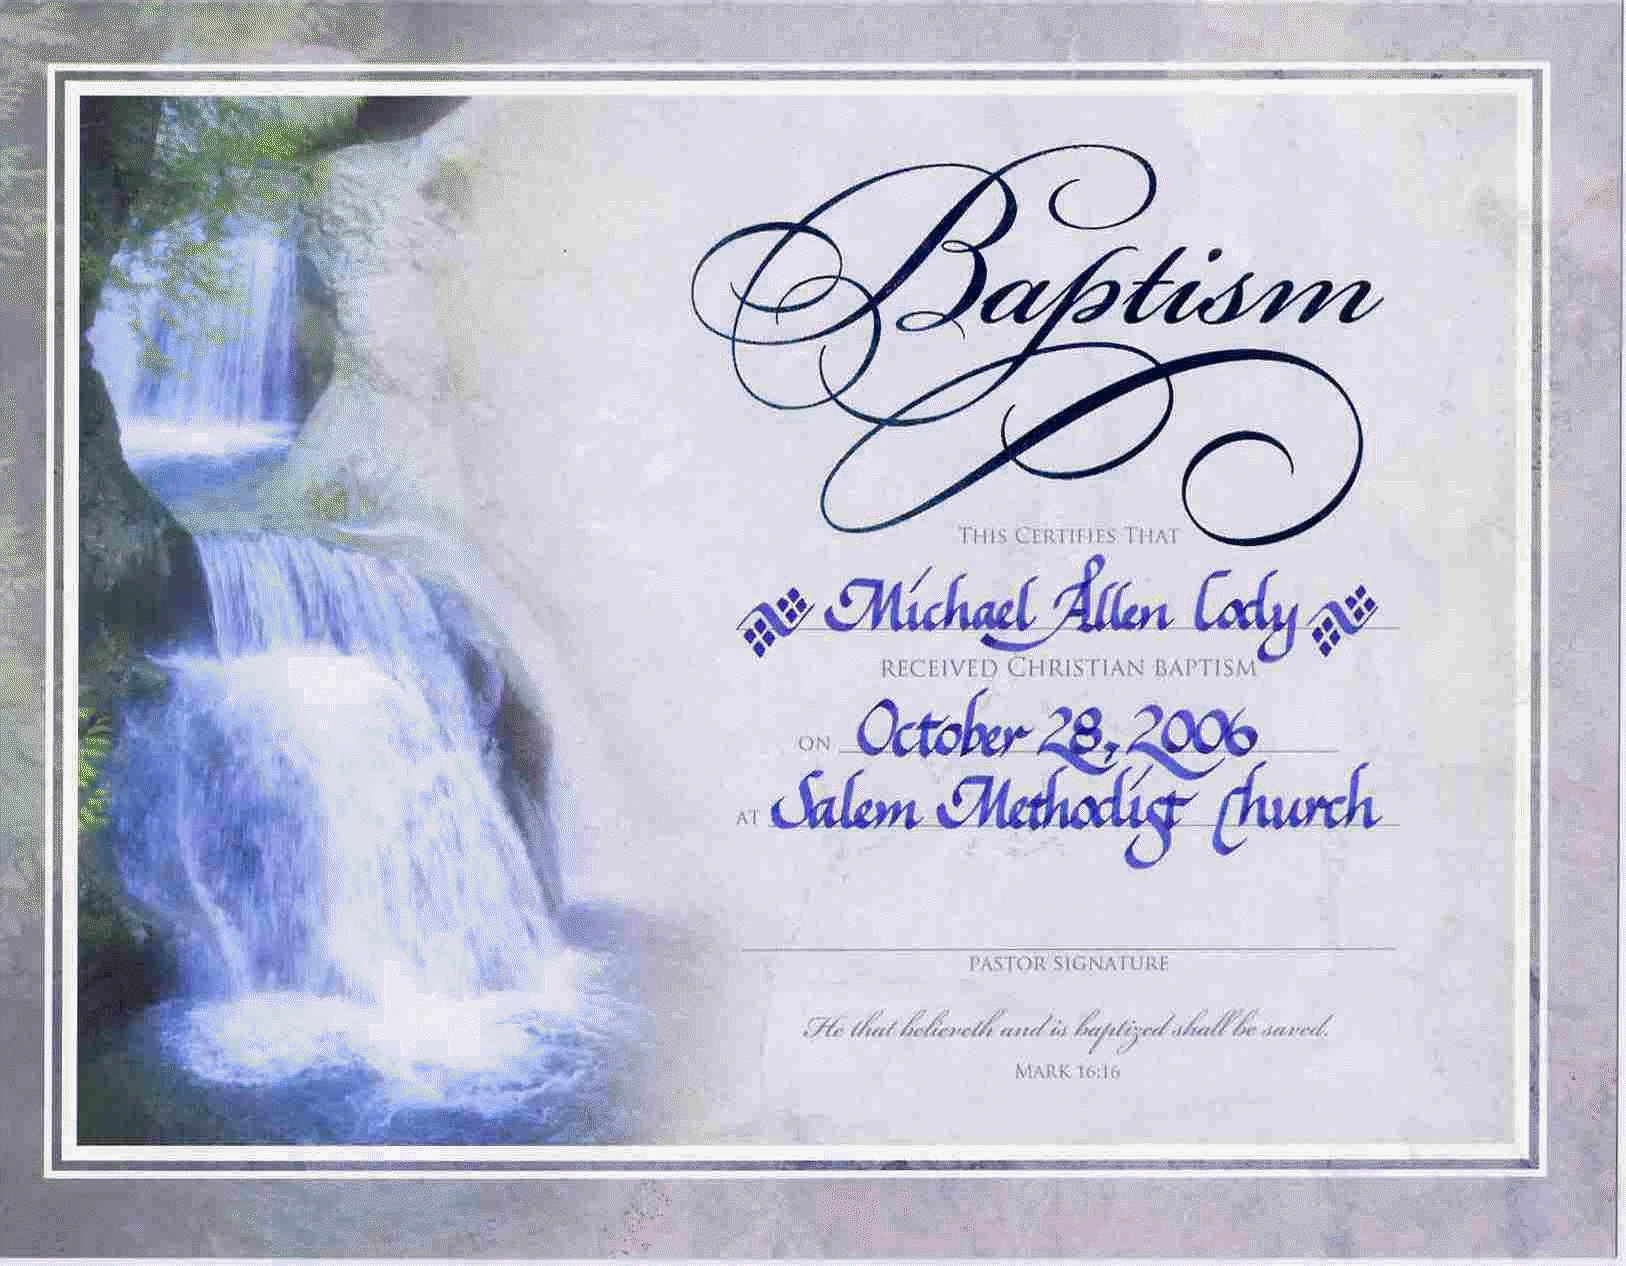 Free Printable Certificate Of Baptism At joy is homemade, we share